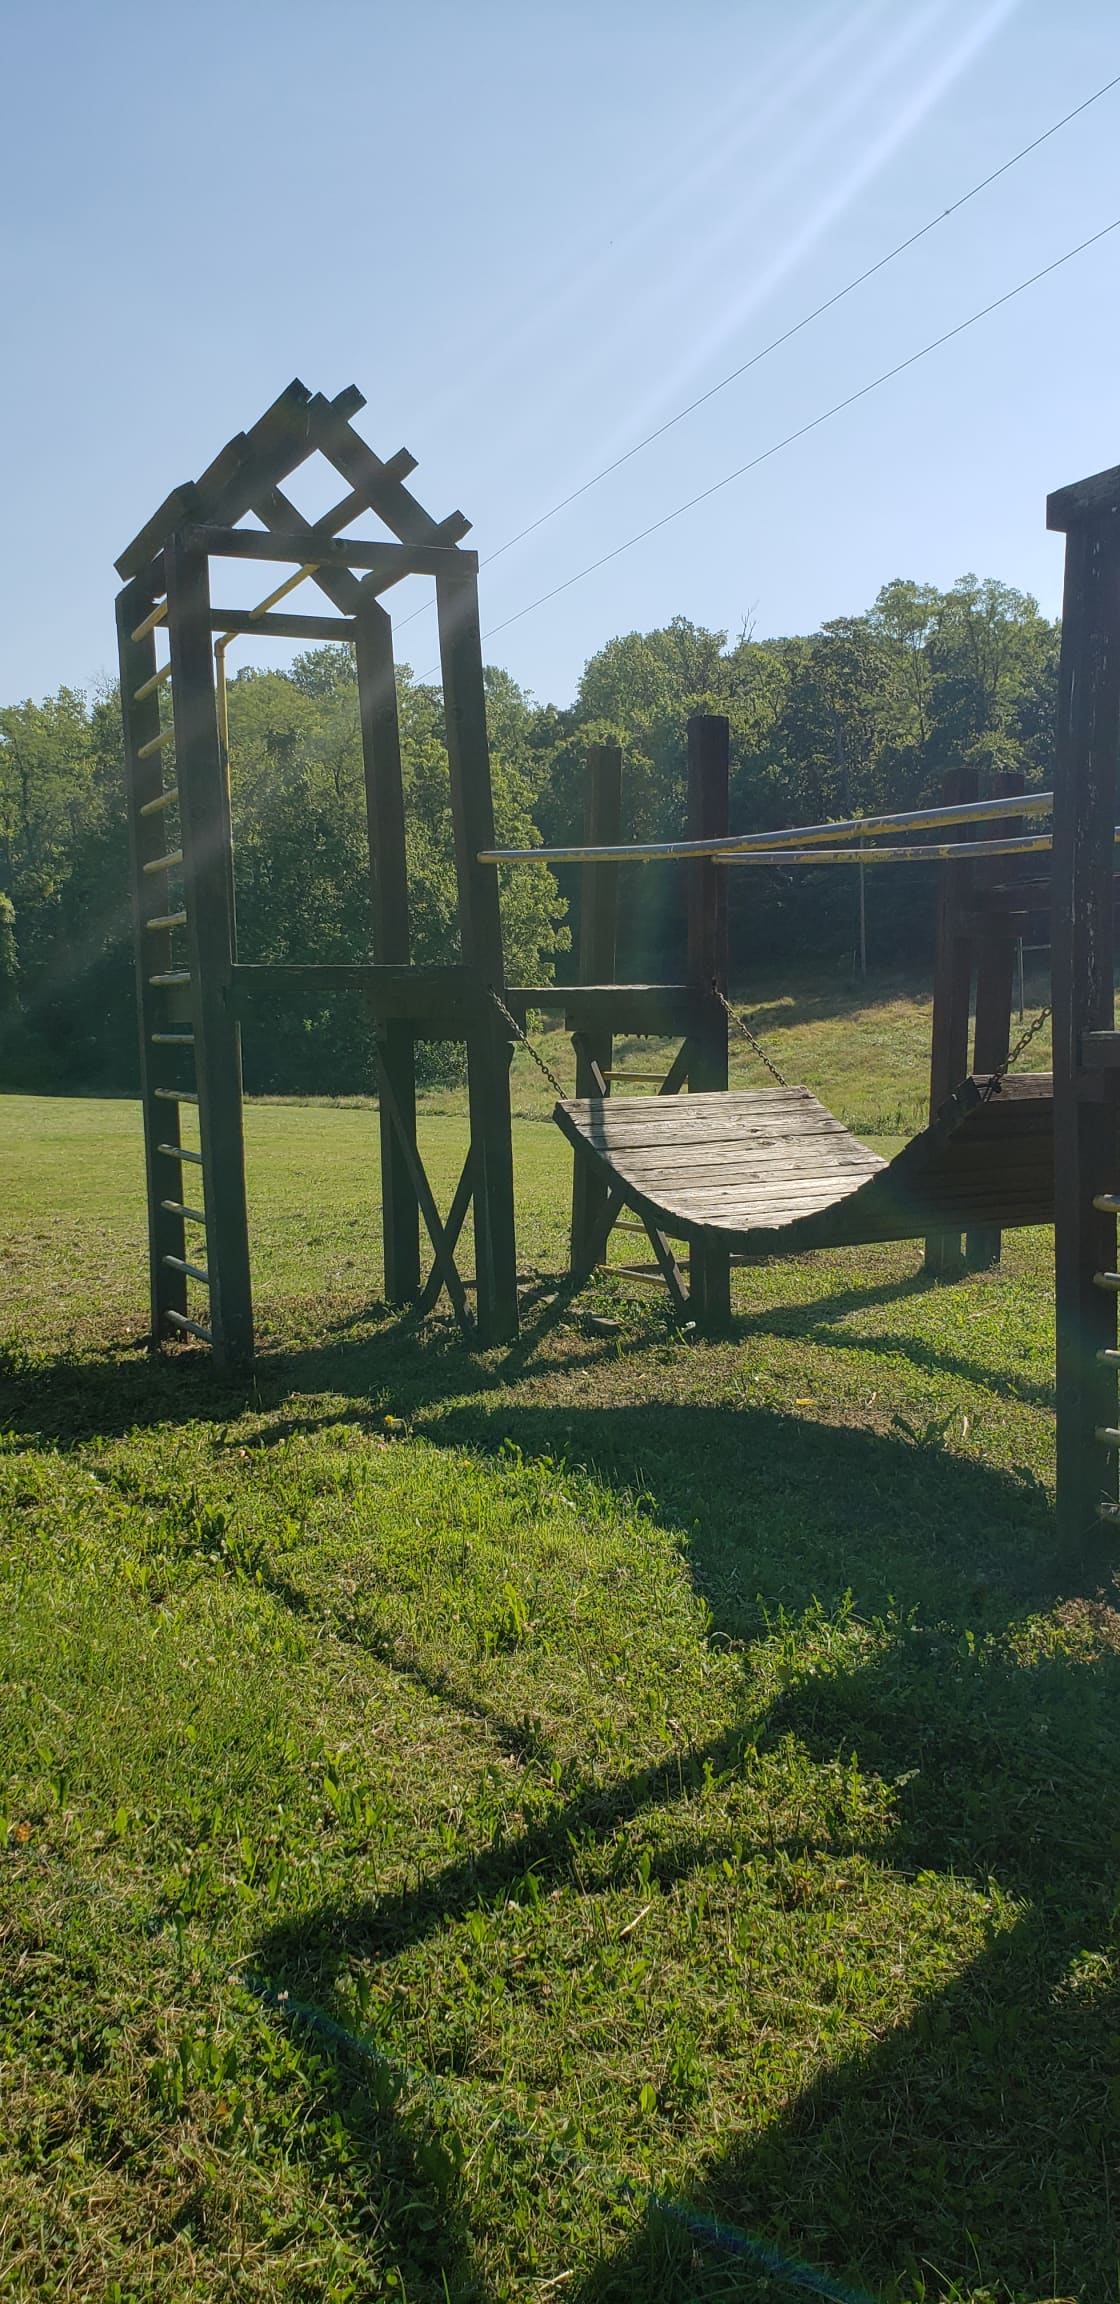 Play structure with bridge, swings and slide.